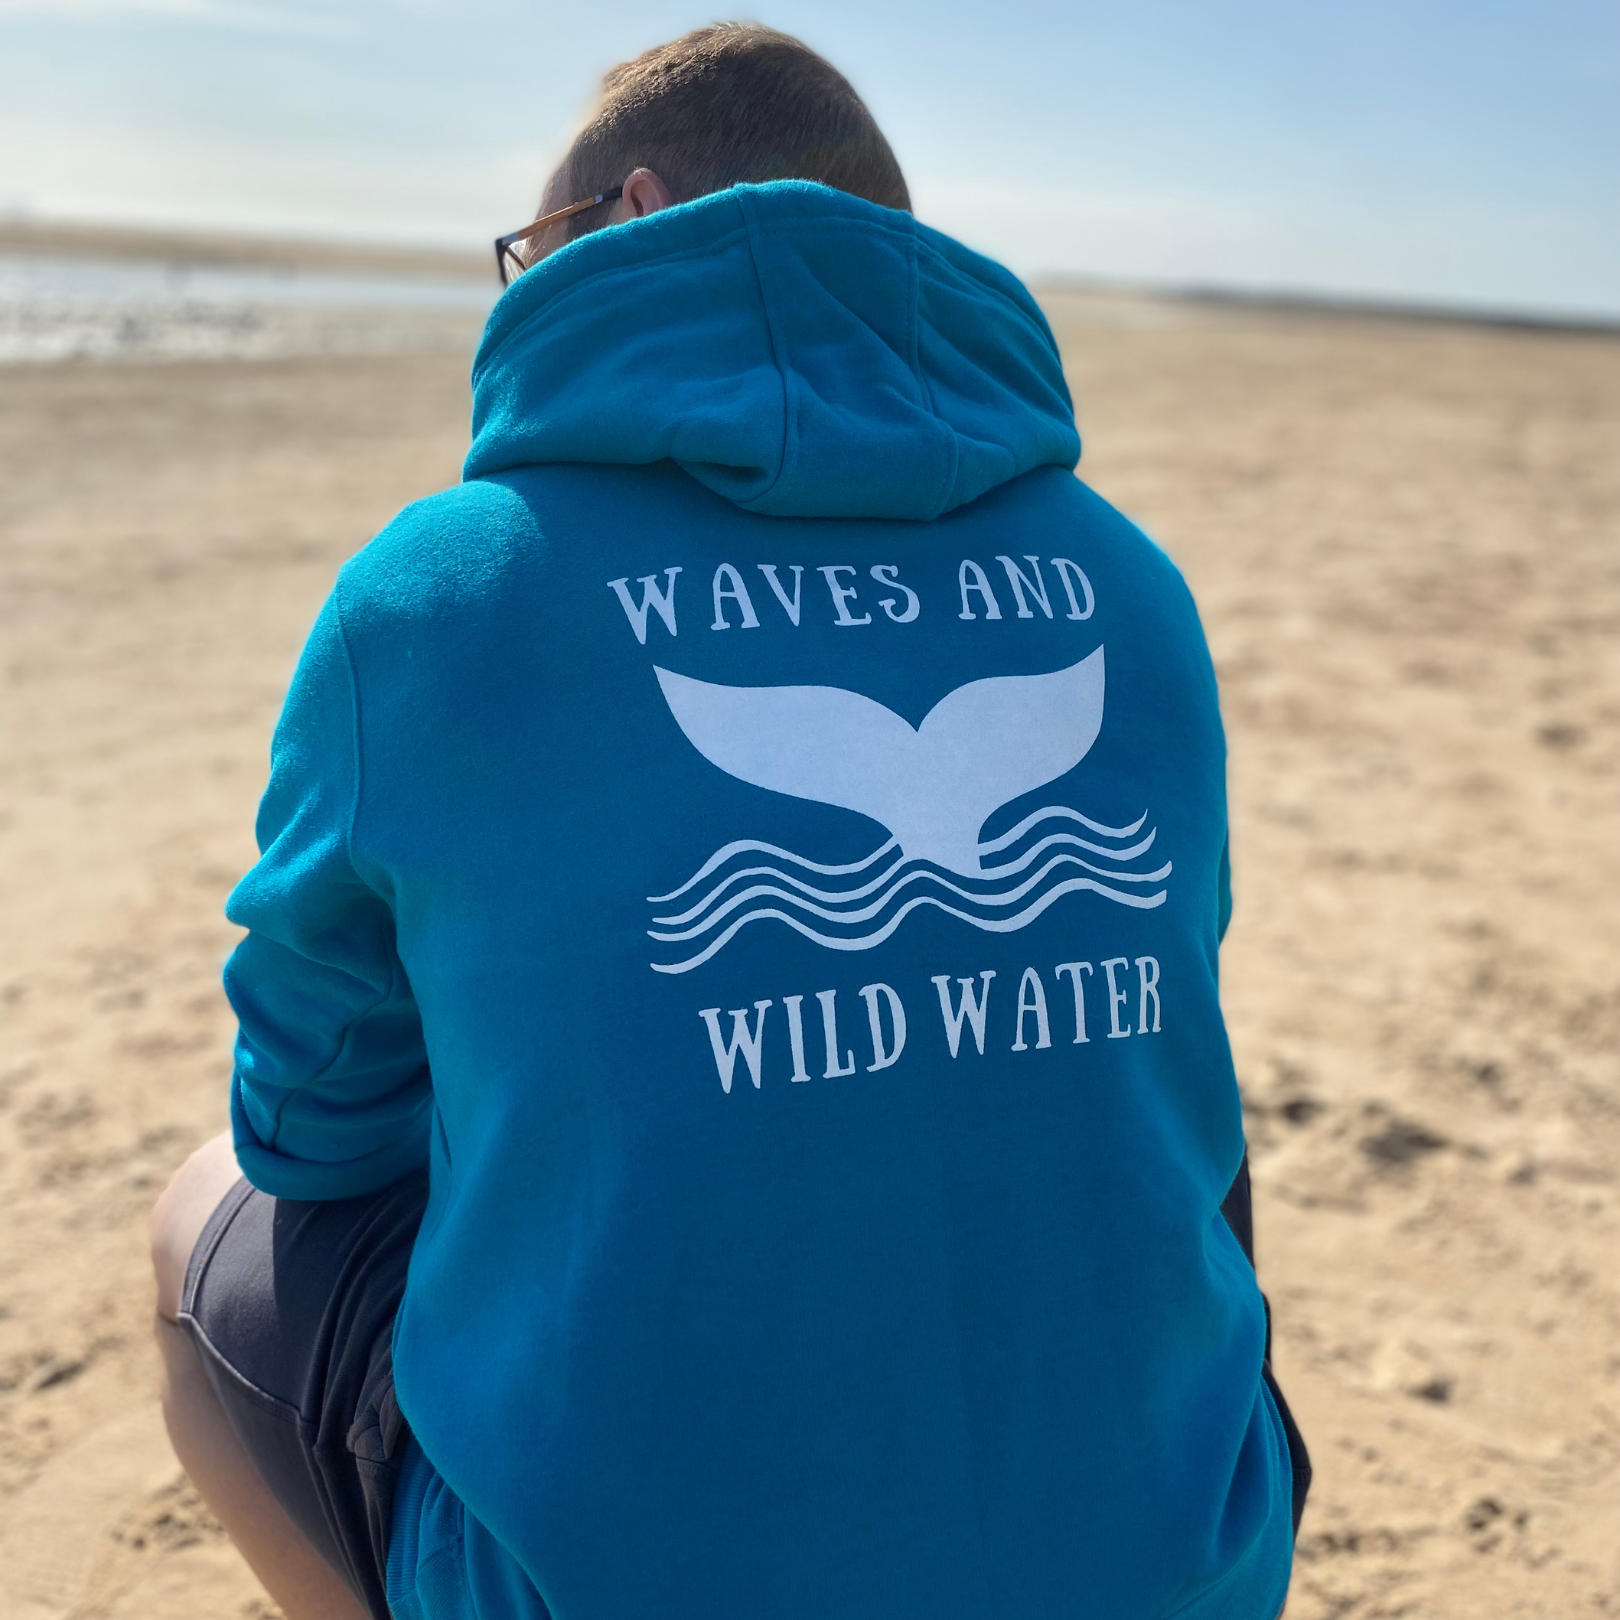 The back of a man wearing a tropical blue hoodie, with Waves & Wild Water logo printed on it in white ink.